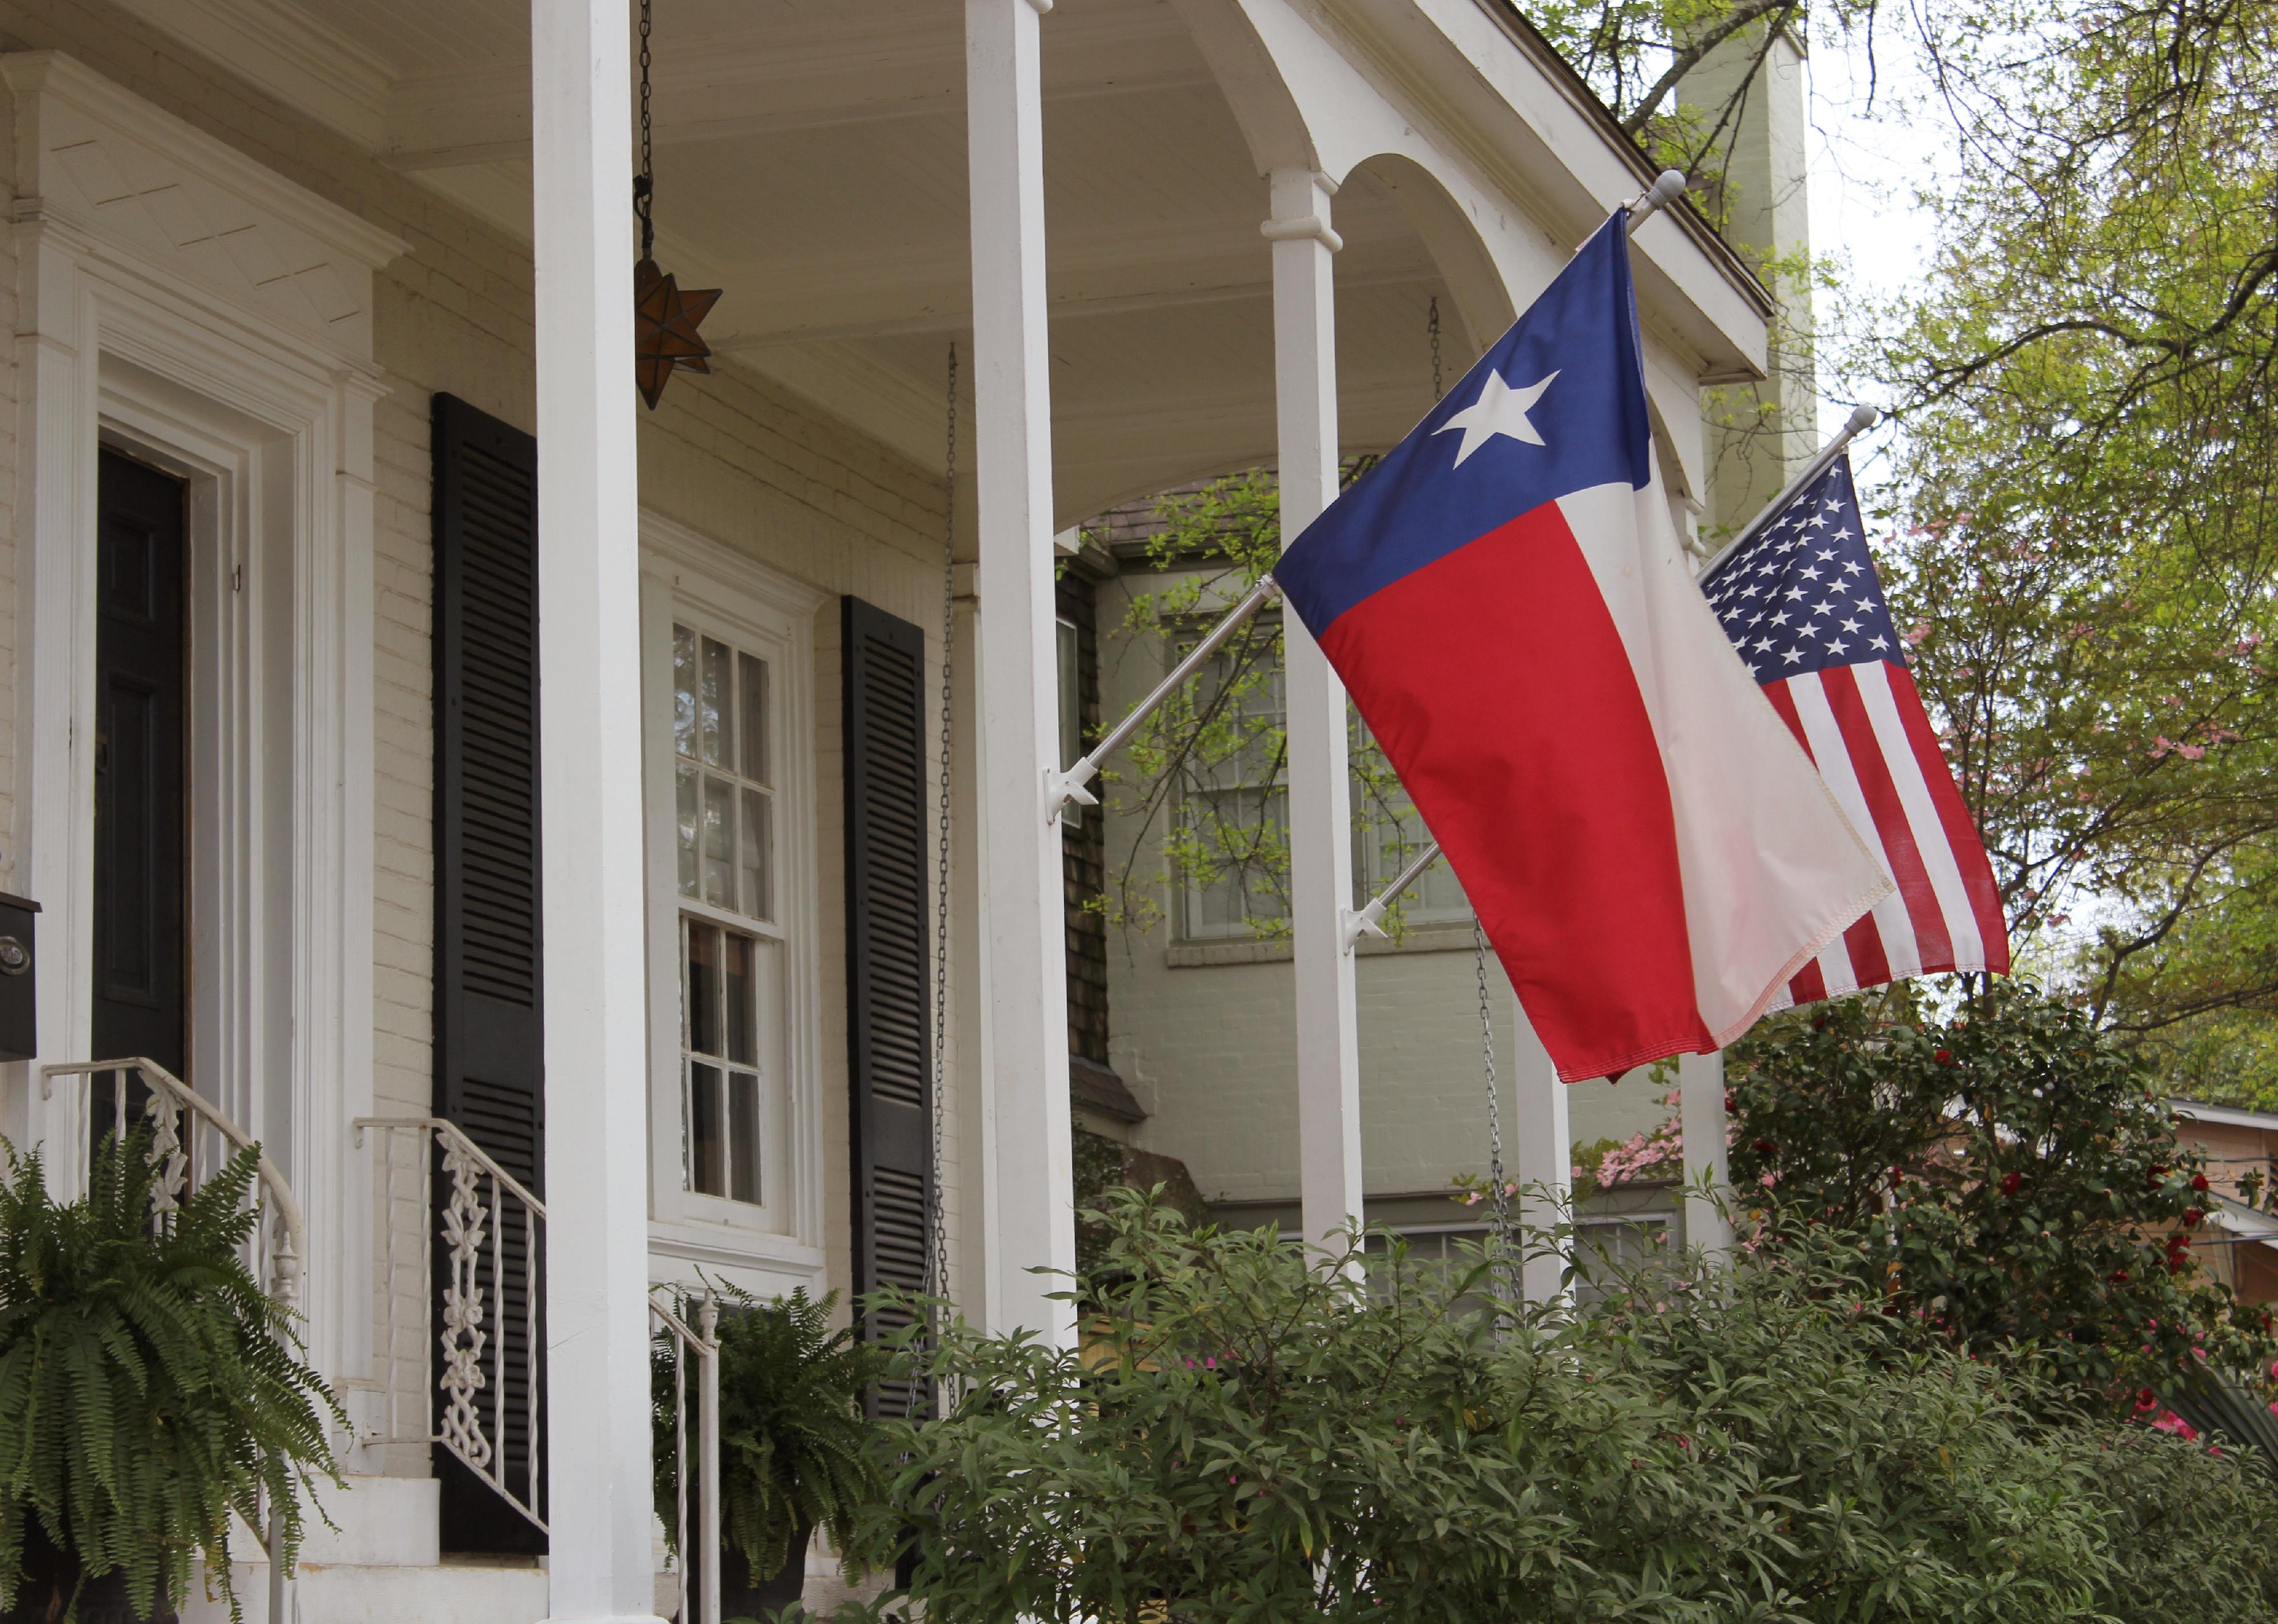 Historic home with Texas and American flags.